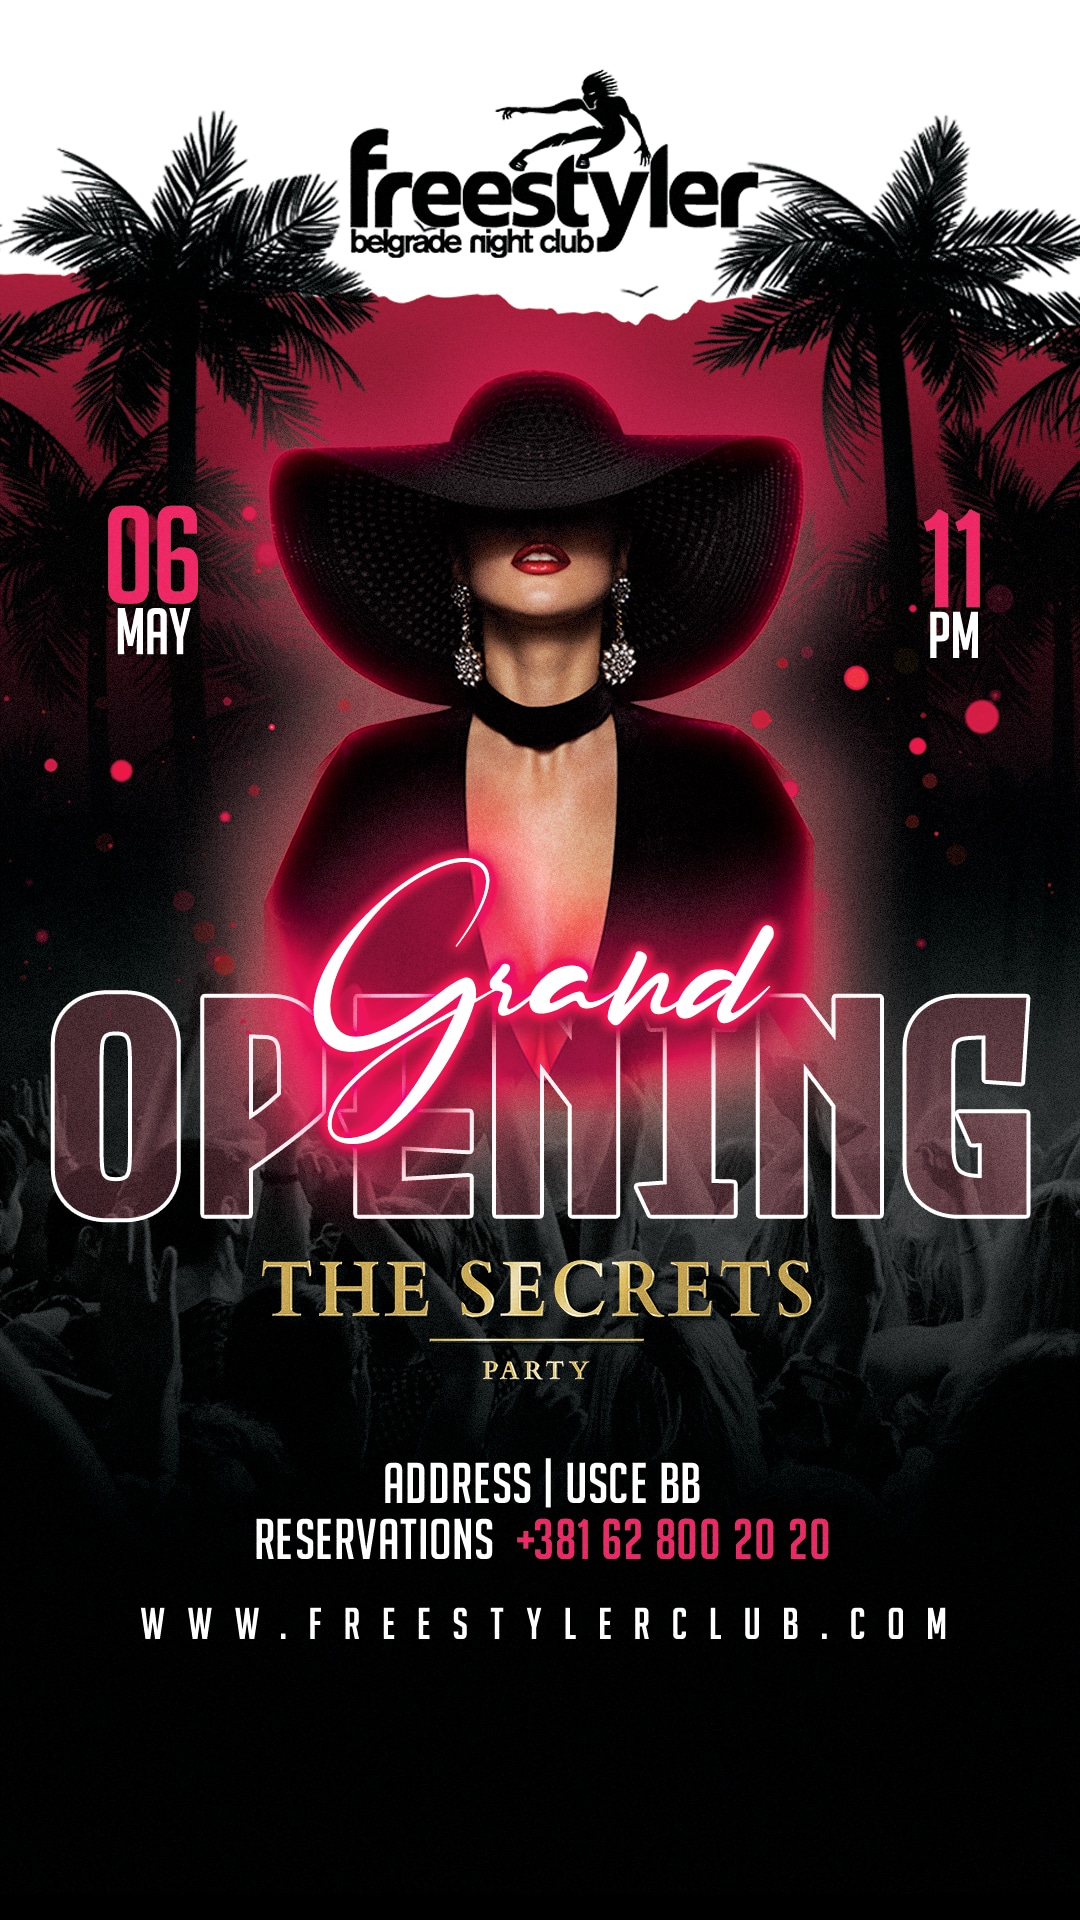 GRAND OPENING – THE SECRETS